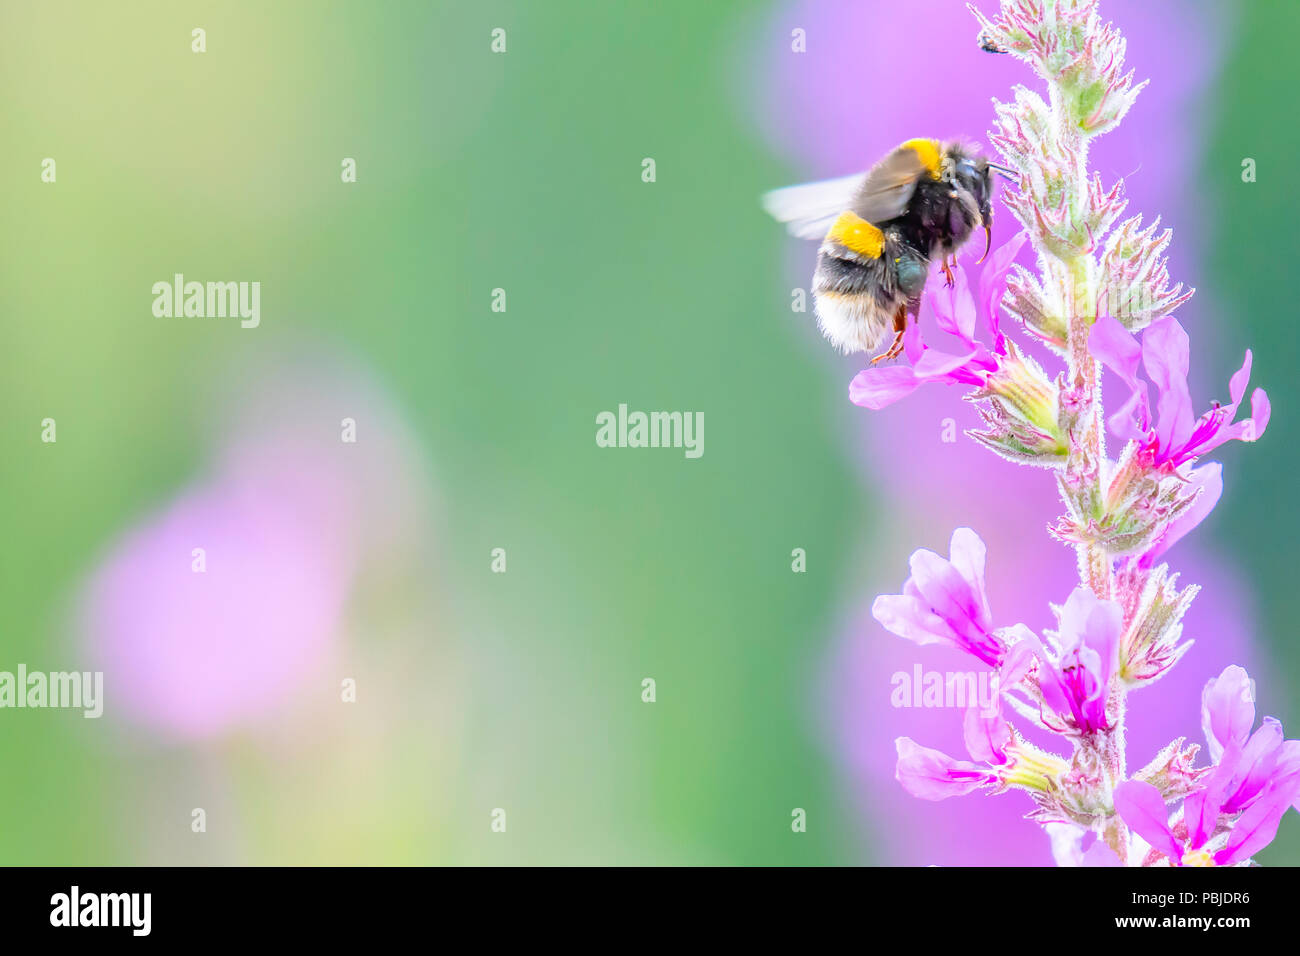 Bumblebee flying towards purple flowers growing on summer meadow with its tongue out ready to collect nectar.Colorful nature image with space for copy. Stock Photo